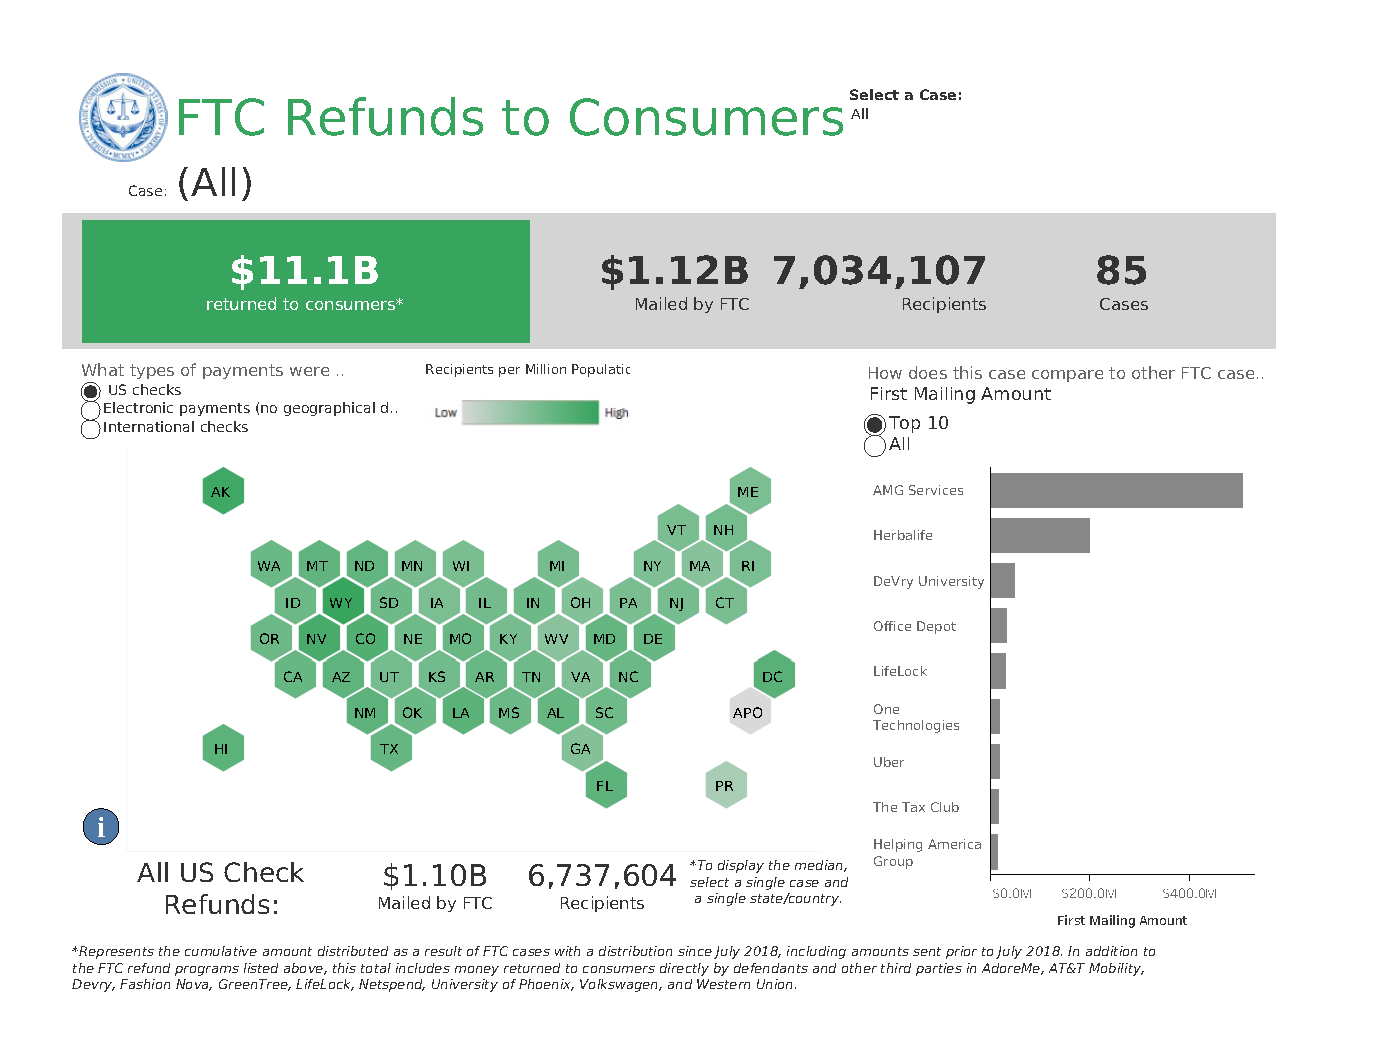 Link to interactive infographic of FTC Refunds to Consumers by case and location.